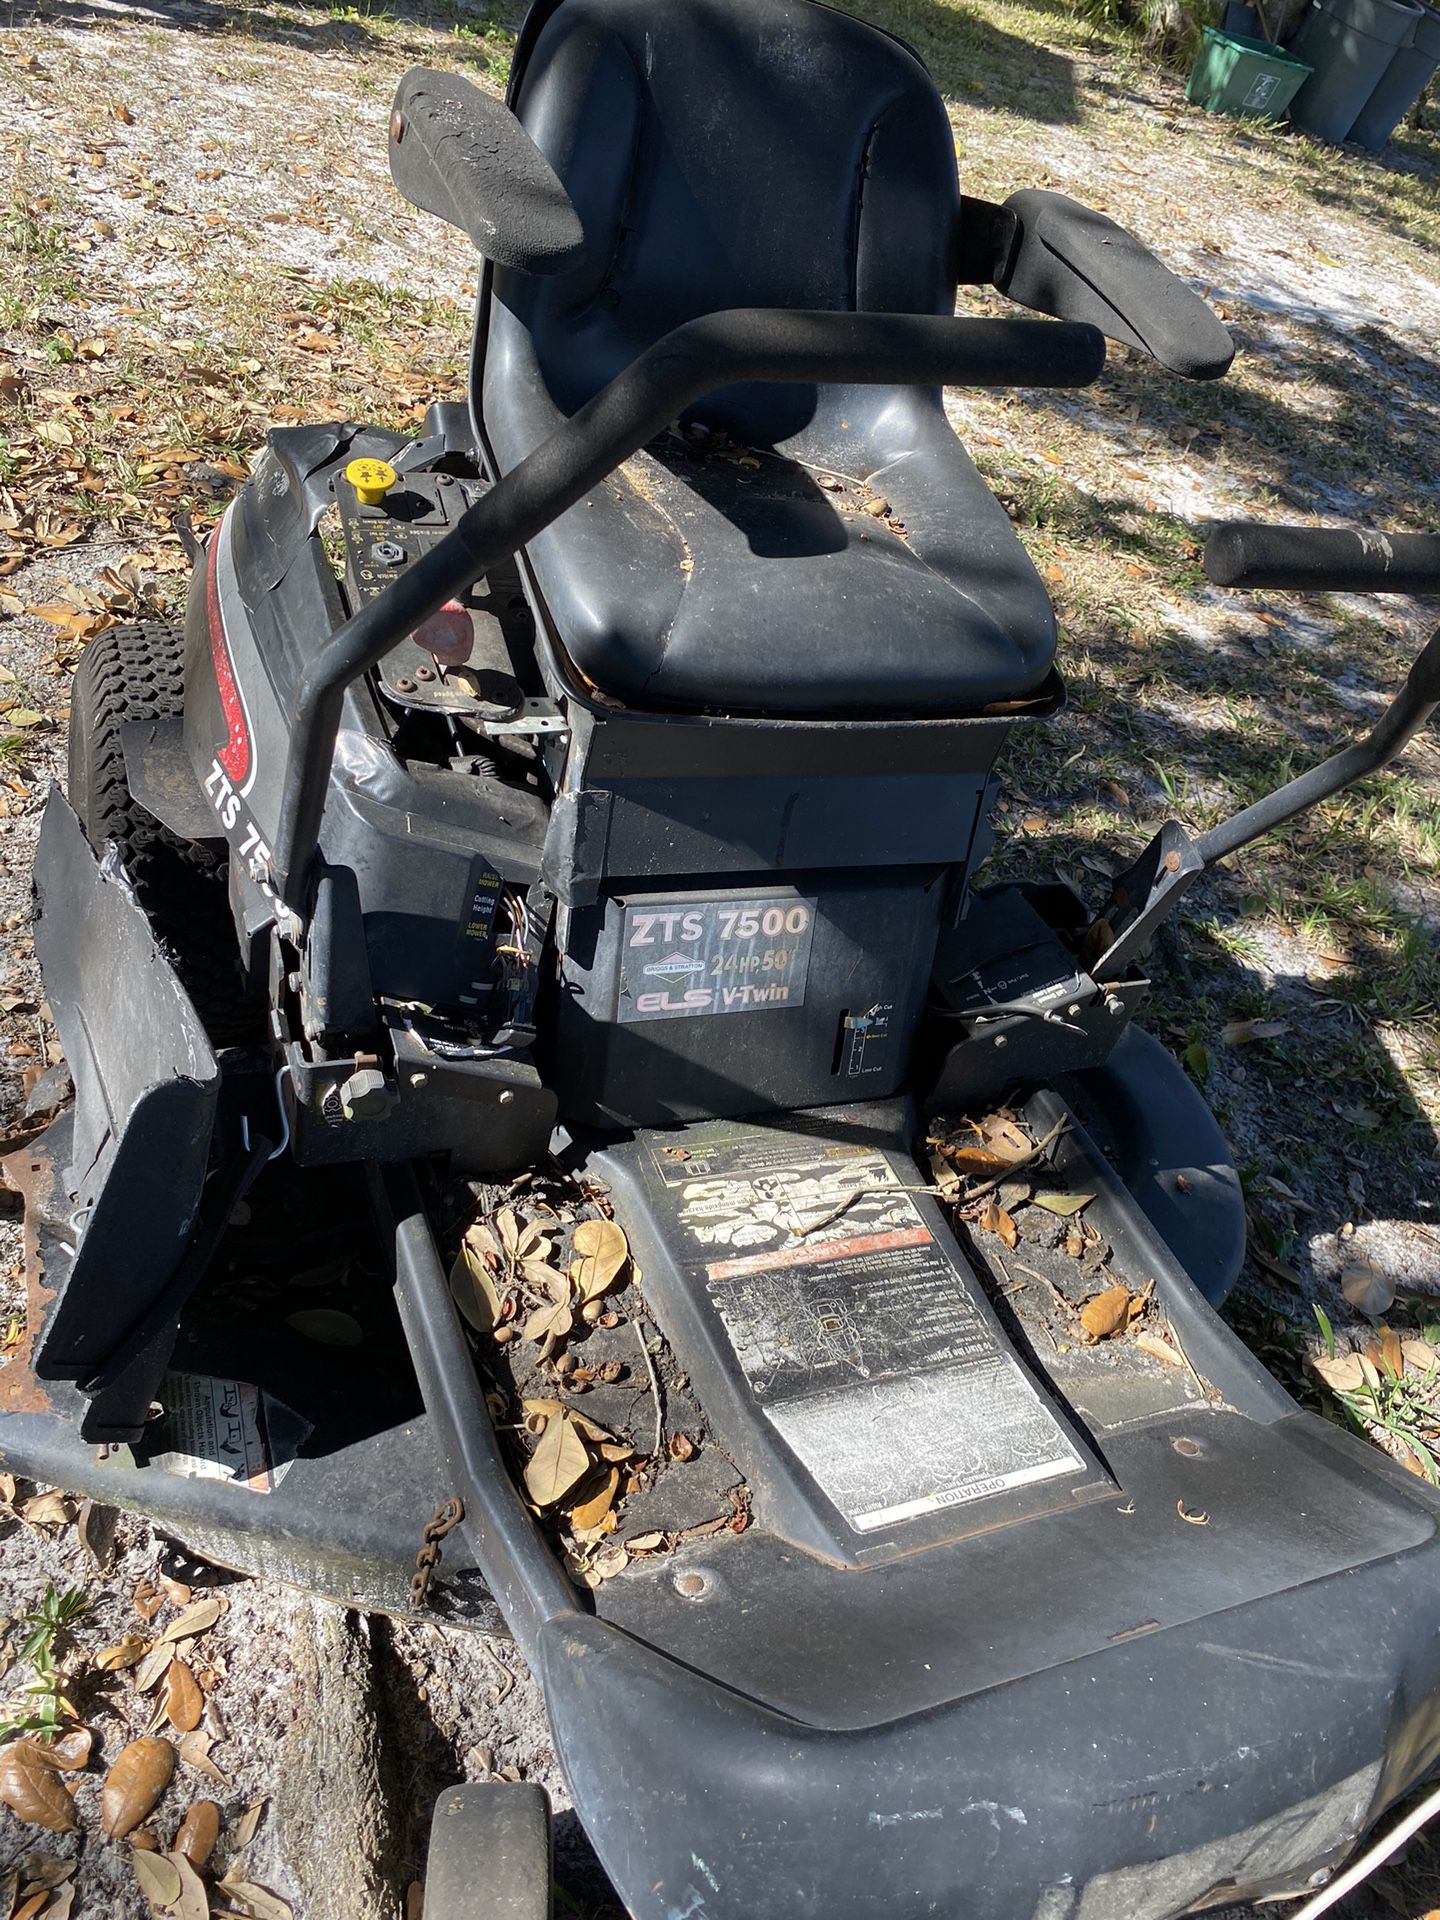 Commercial  Craftsman  Zts  7500  For Sale Riding Mower  Was Working But  Now It’s  Not  I Don’t Why $300  24v Twin  Hp  50 Cut Need  A Battery  Obo  